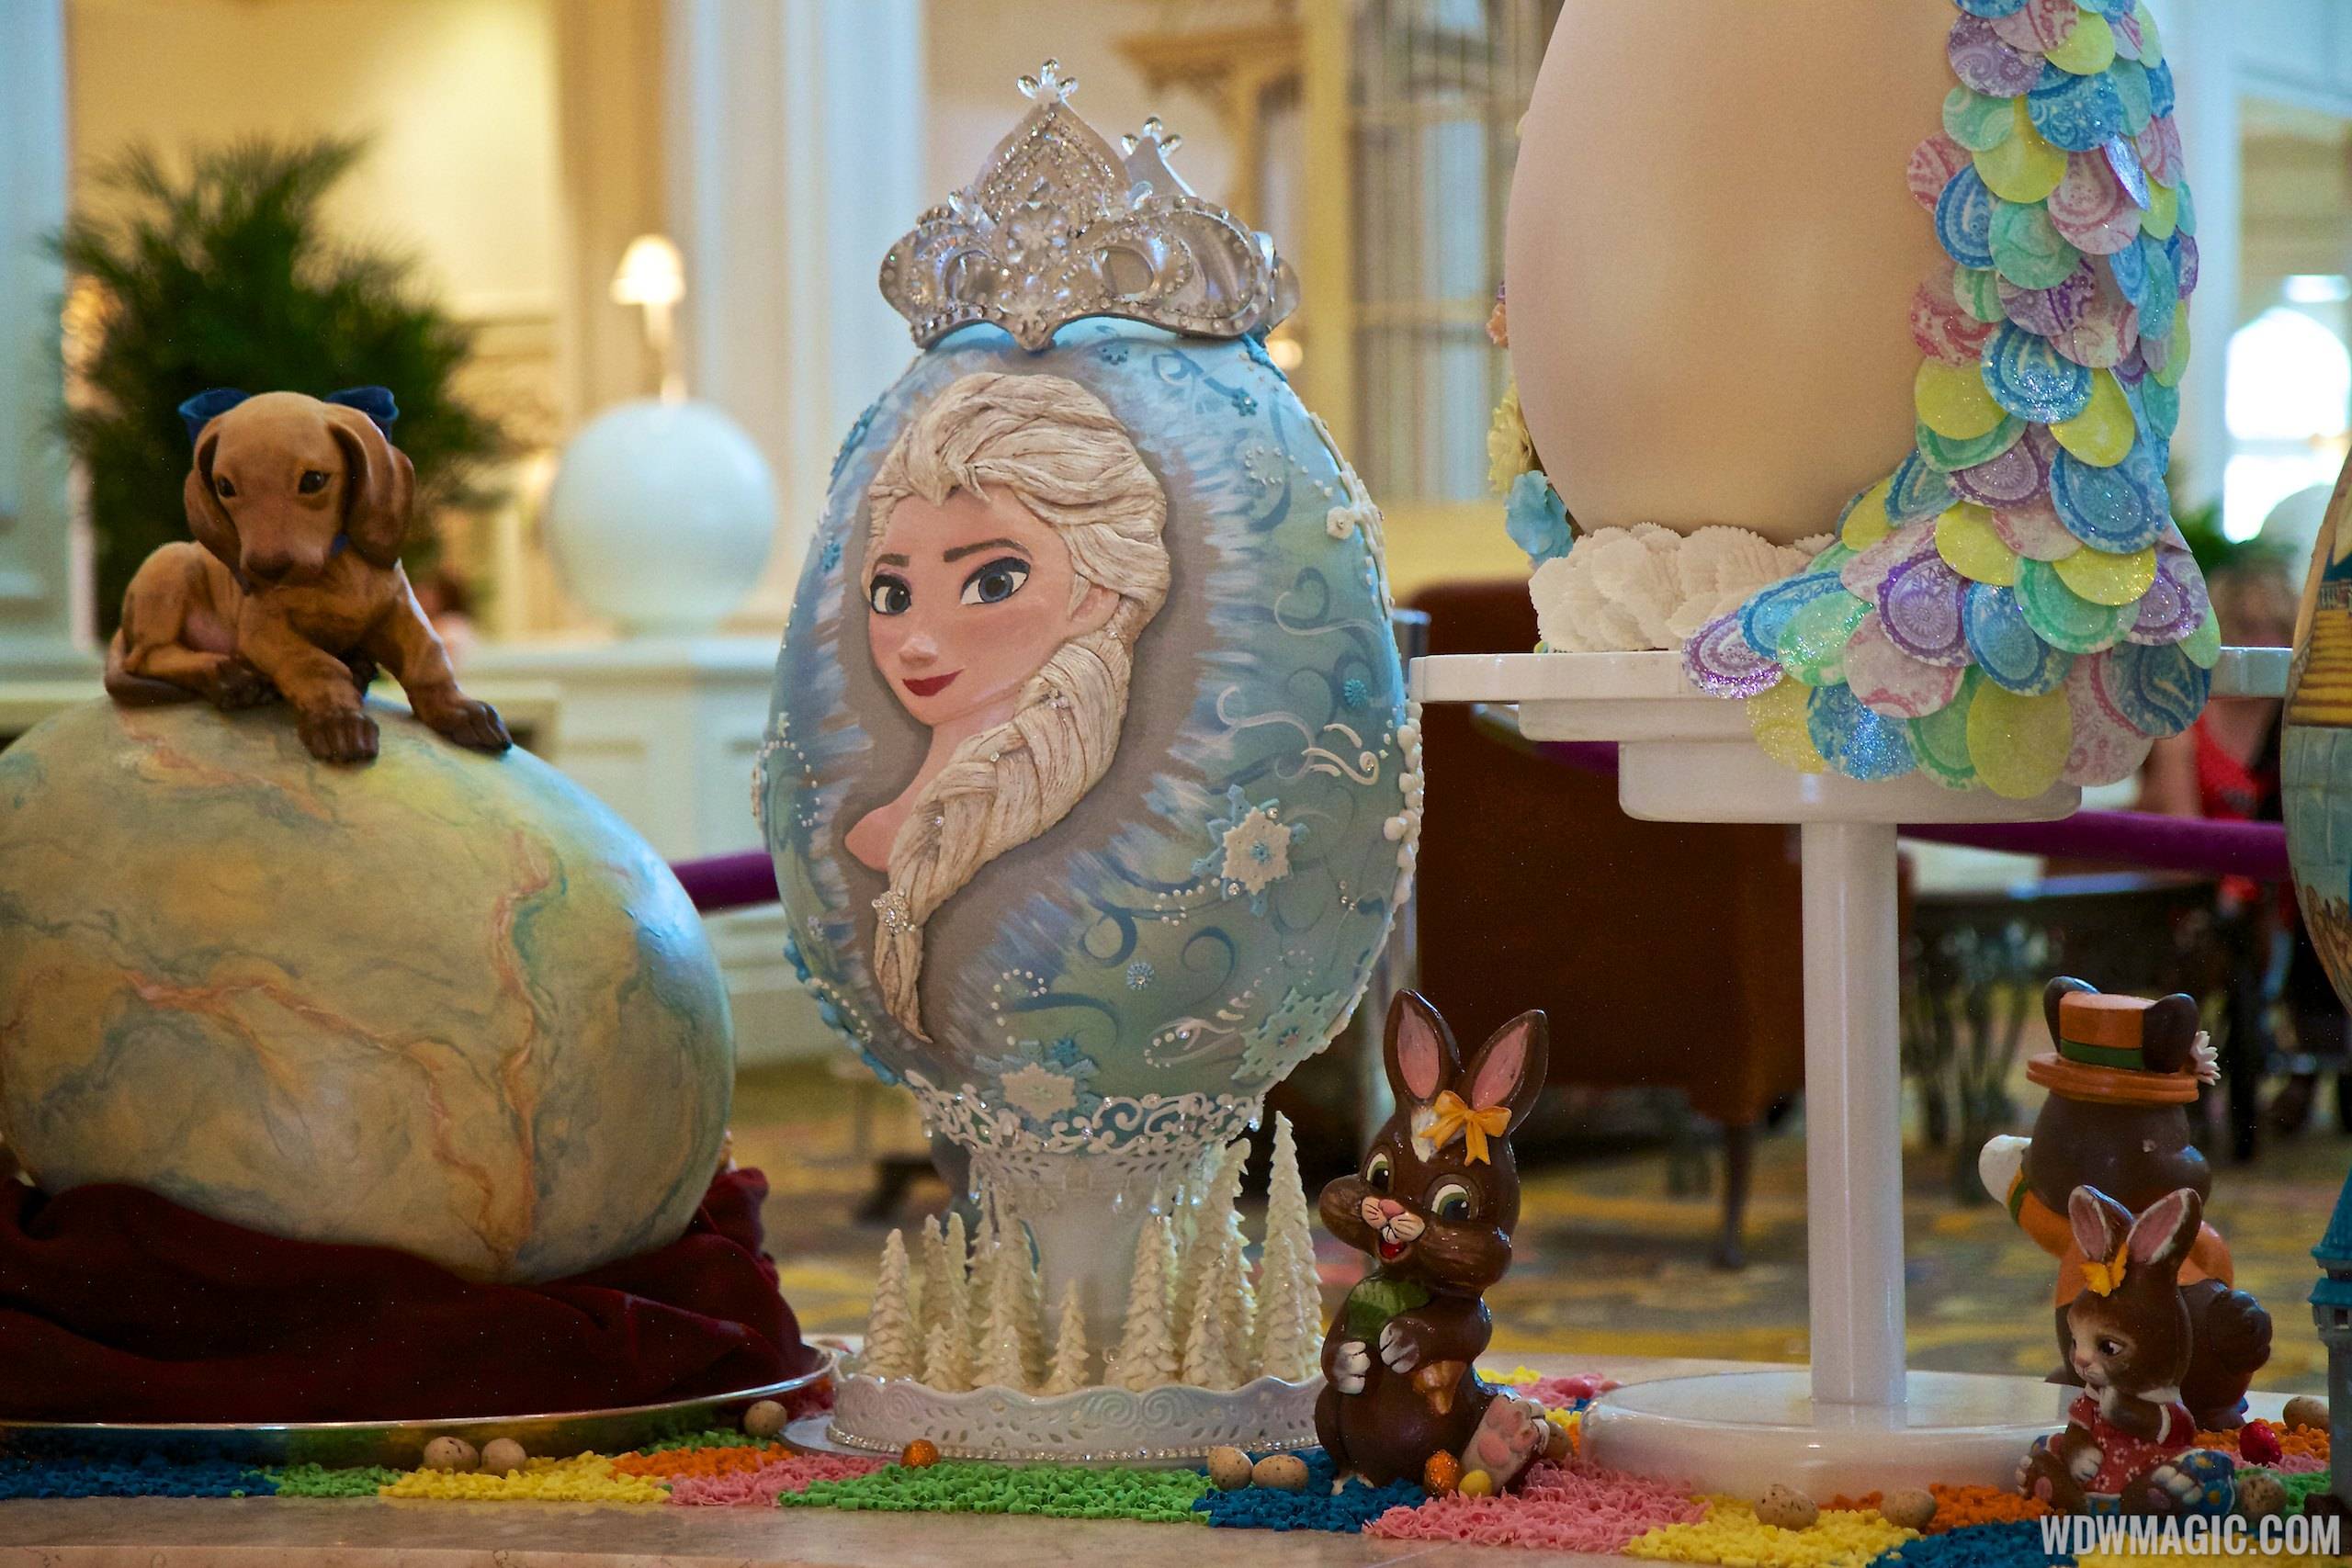 Frozen Easter Egg at the Grand Floridian Resort